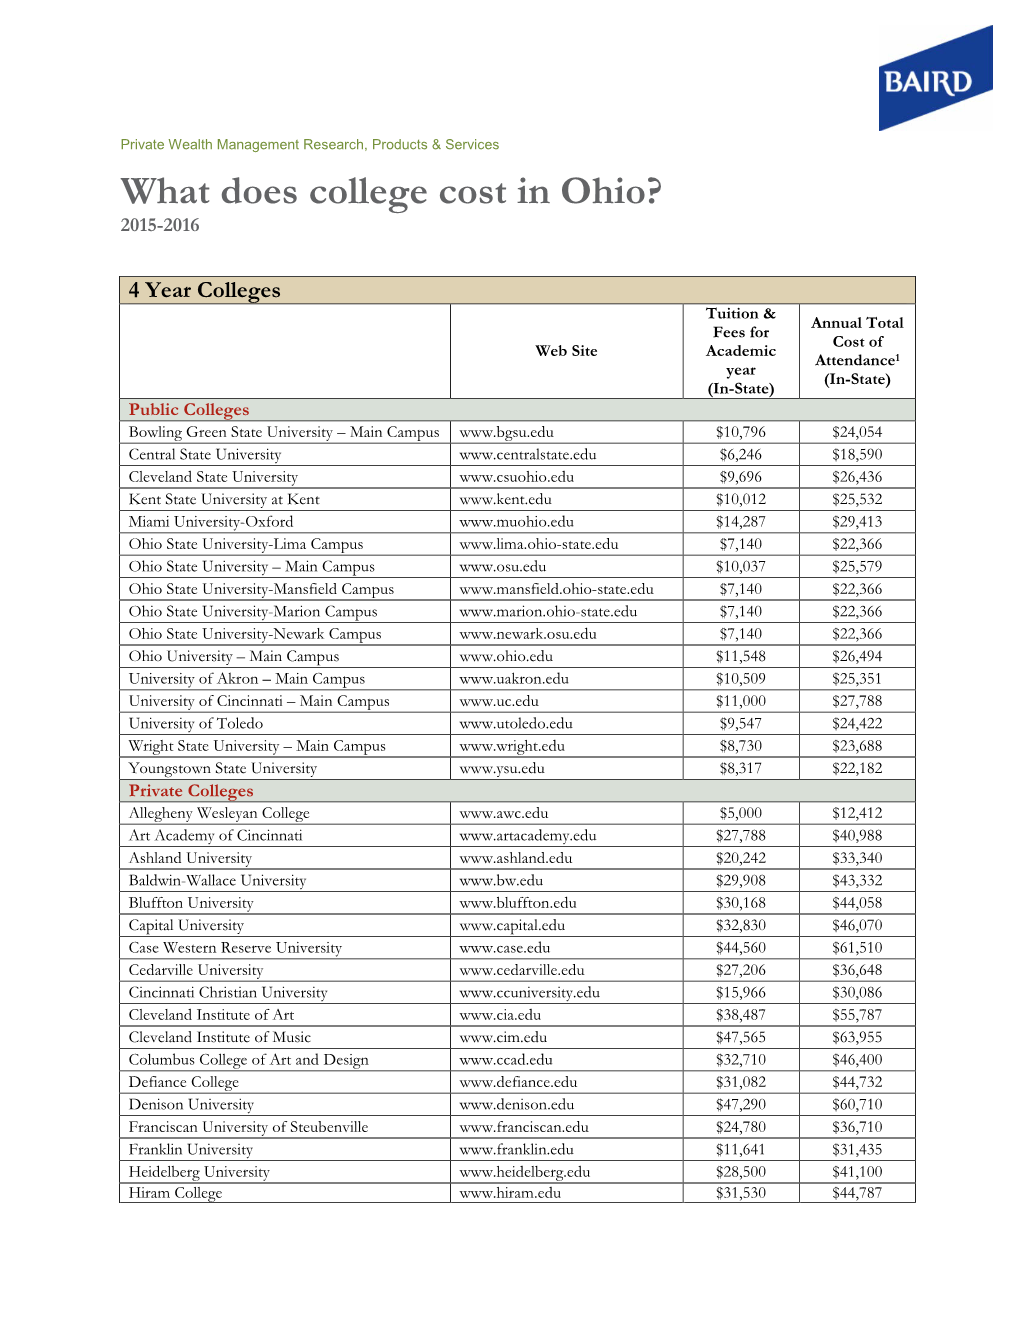 What Does College Cost in Ohio? 2015-2016